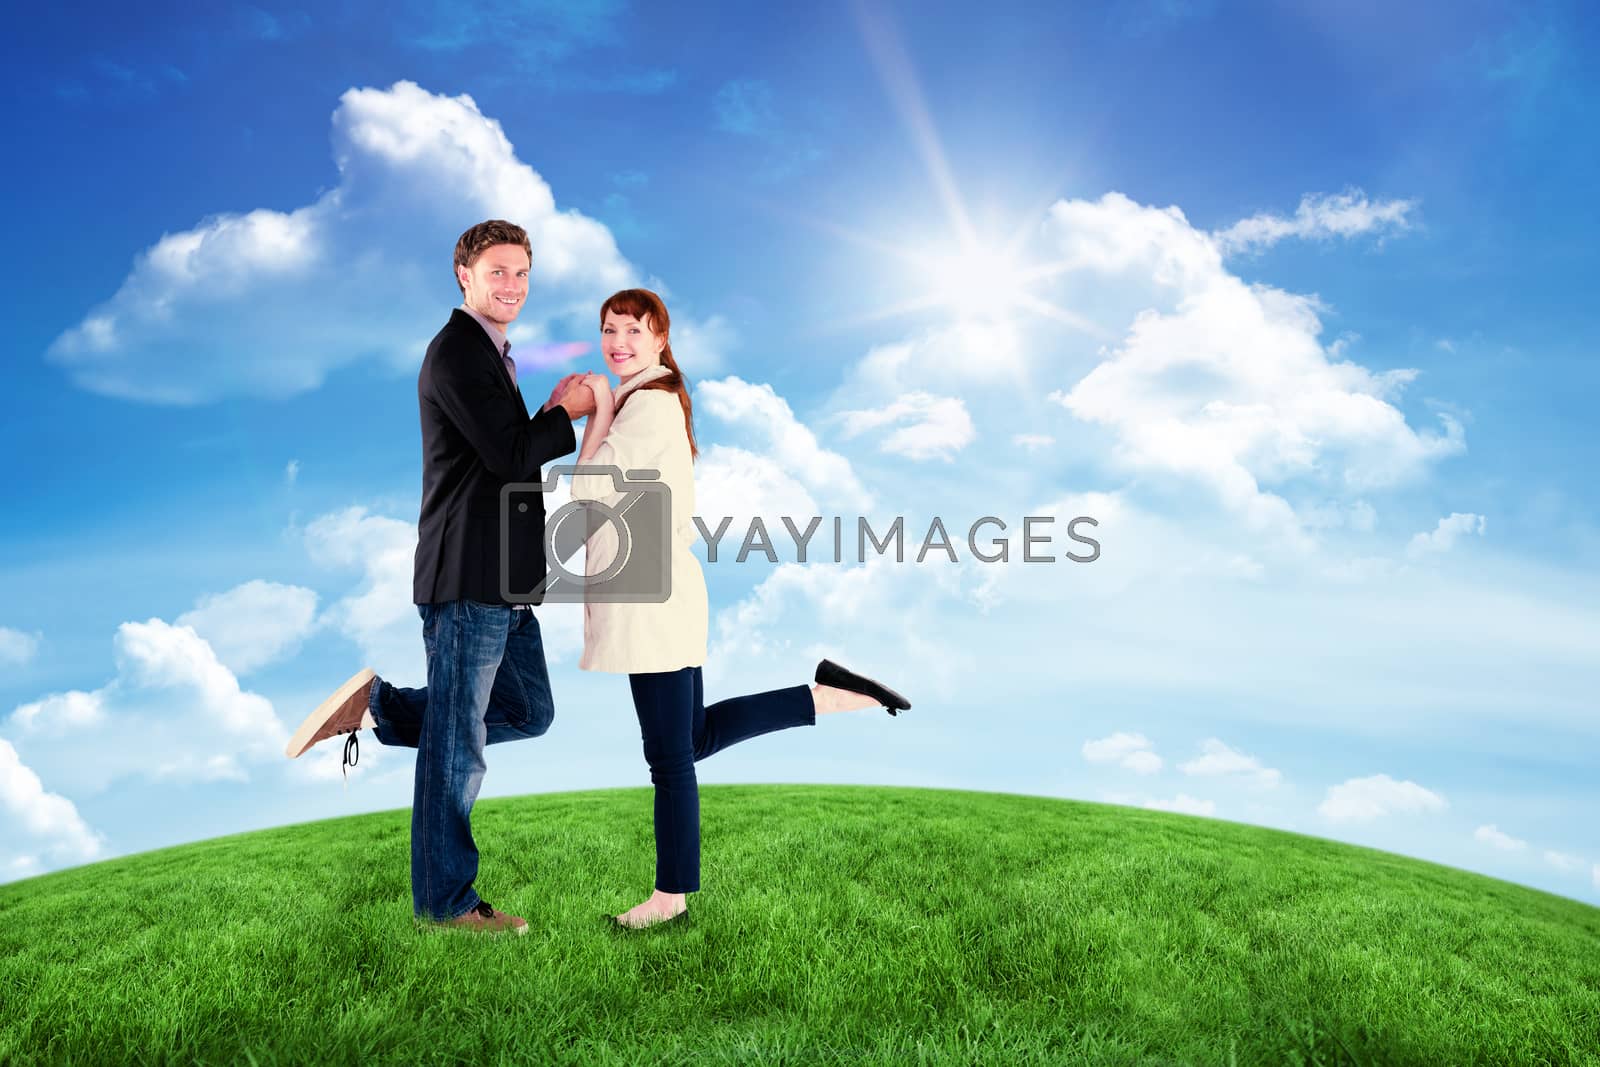 Royalty free image of Composite image of smiling couple with raised legs by Wavebreakmedia